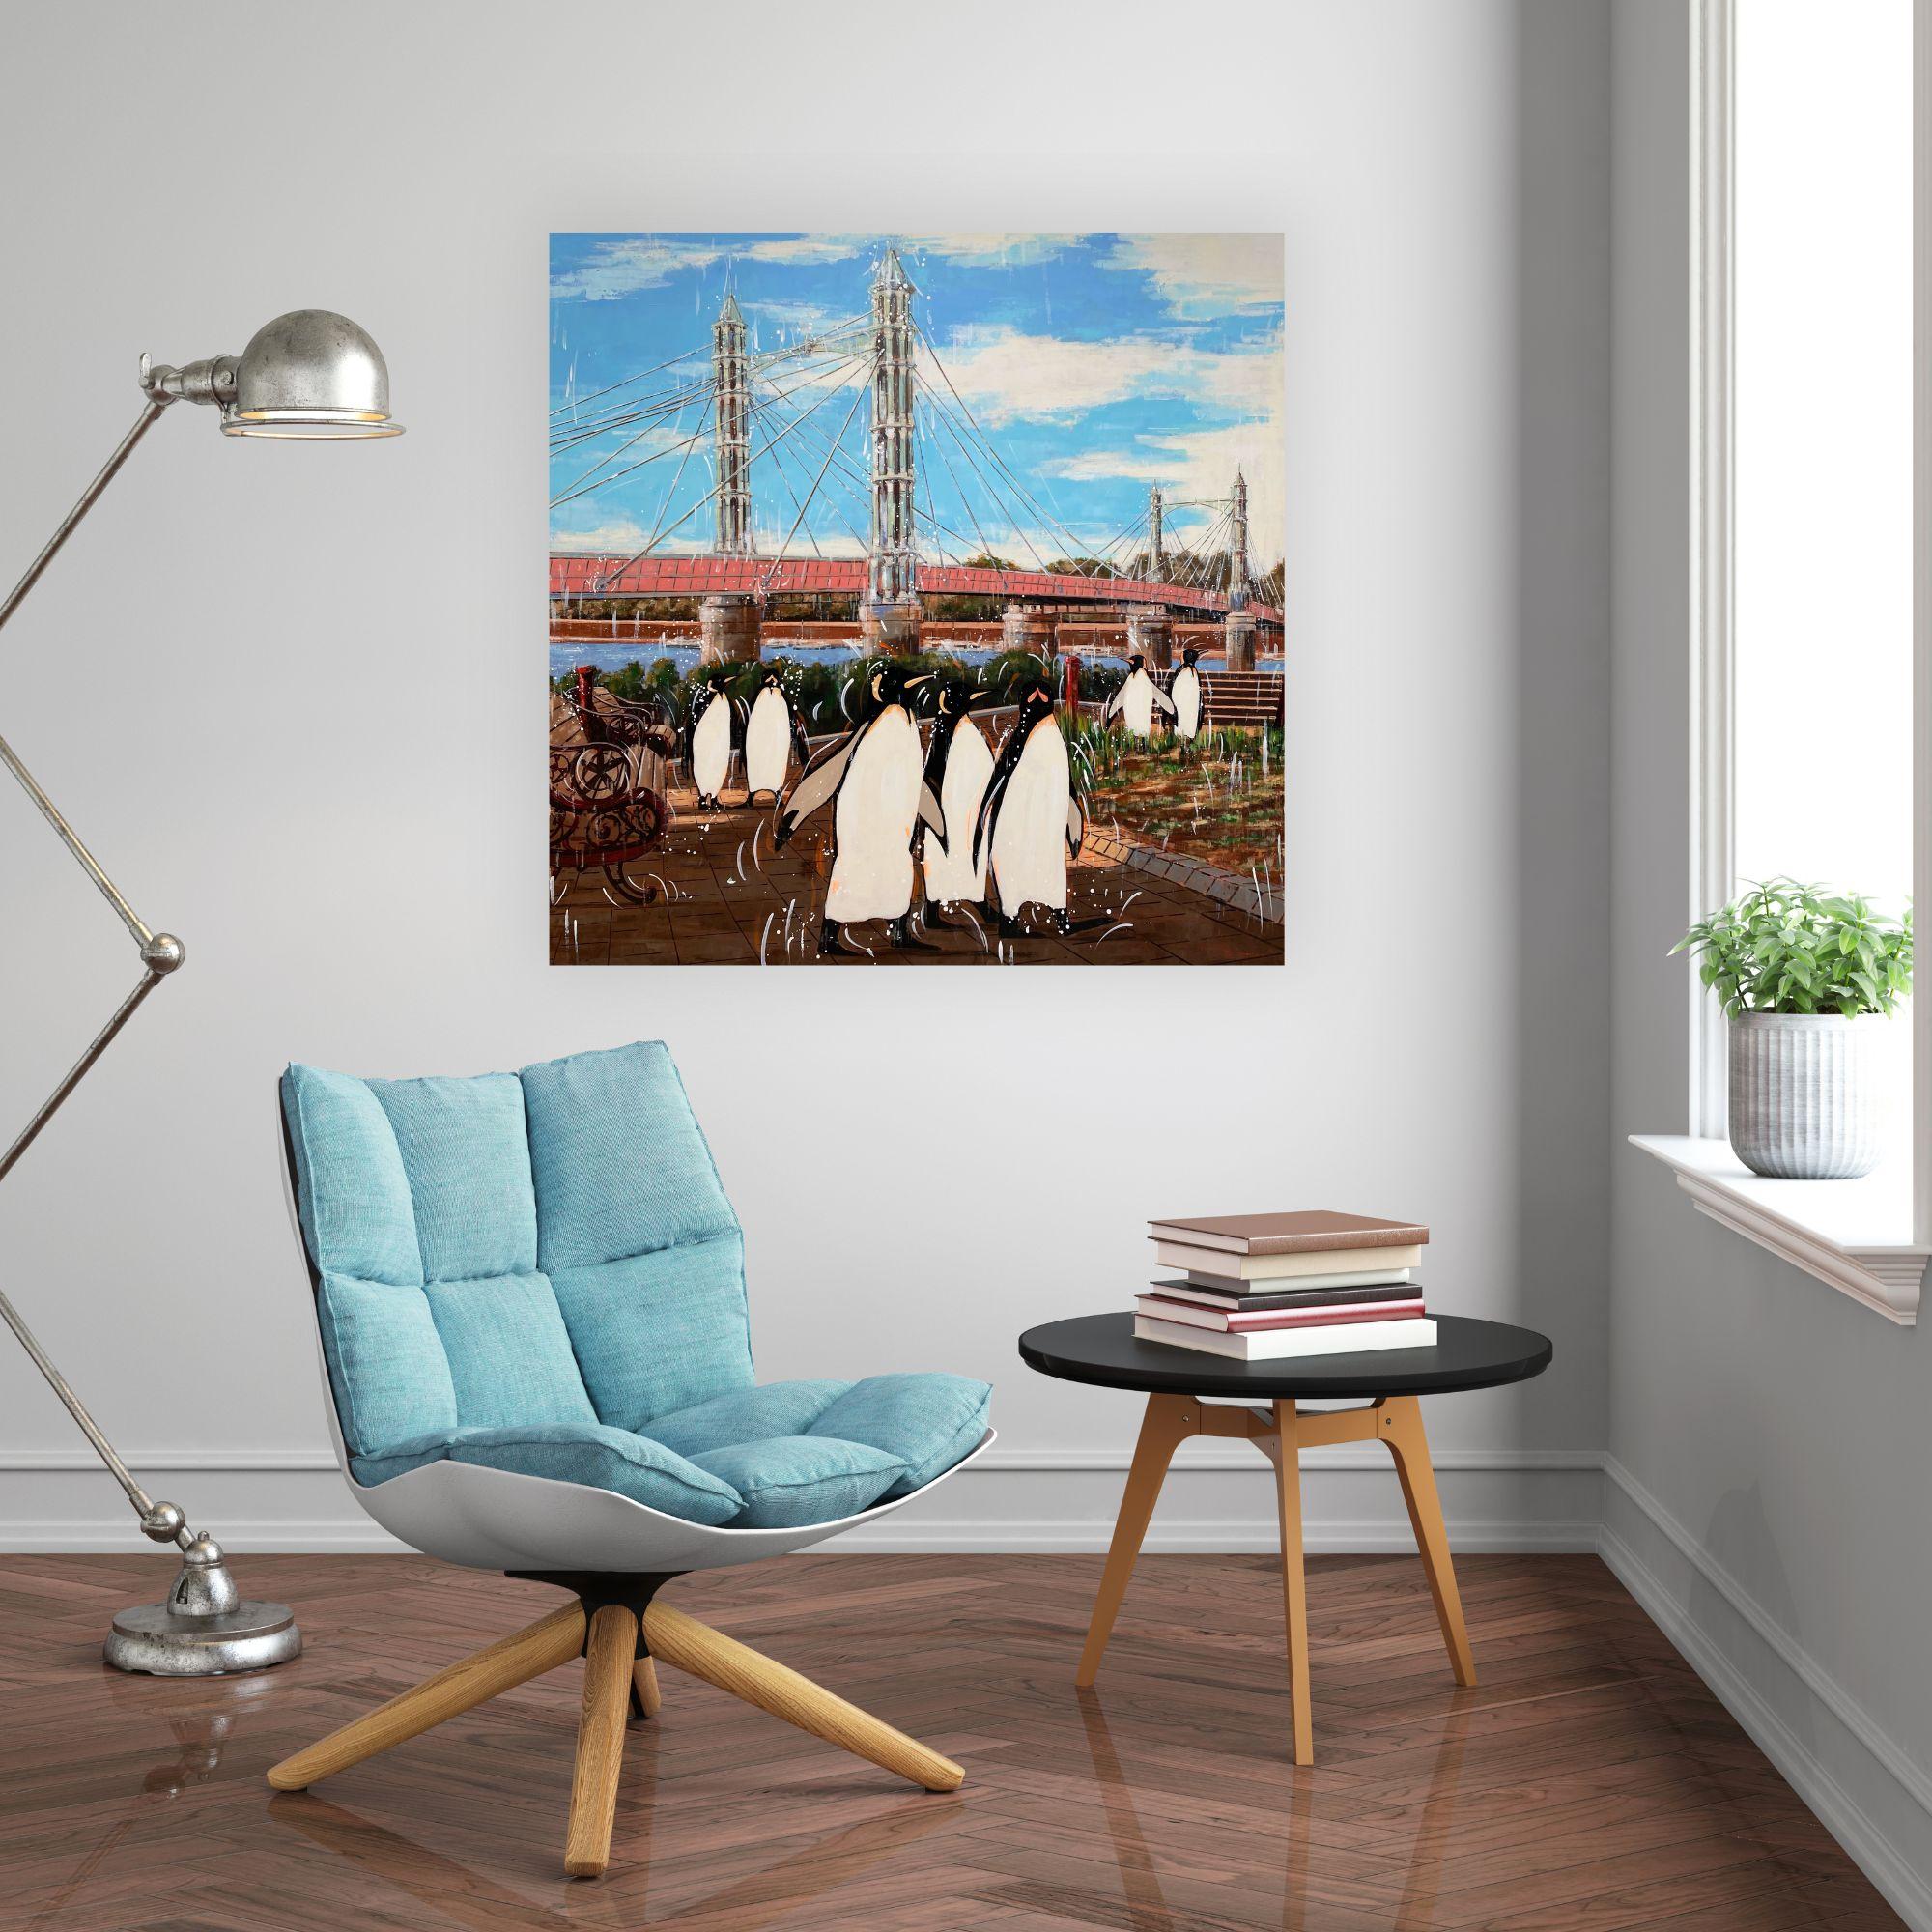 In this contemporary surrealist painting, Nathan Neven skillfully merges a familiar cityscape and classic architectural elements with the unexpected presence of an Arctic penguin near the iconic Albert Bridge in London. This delightful and dreamlike